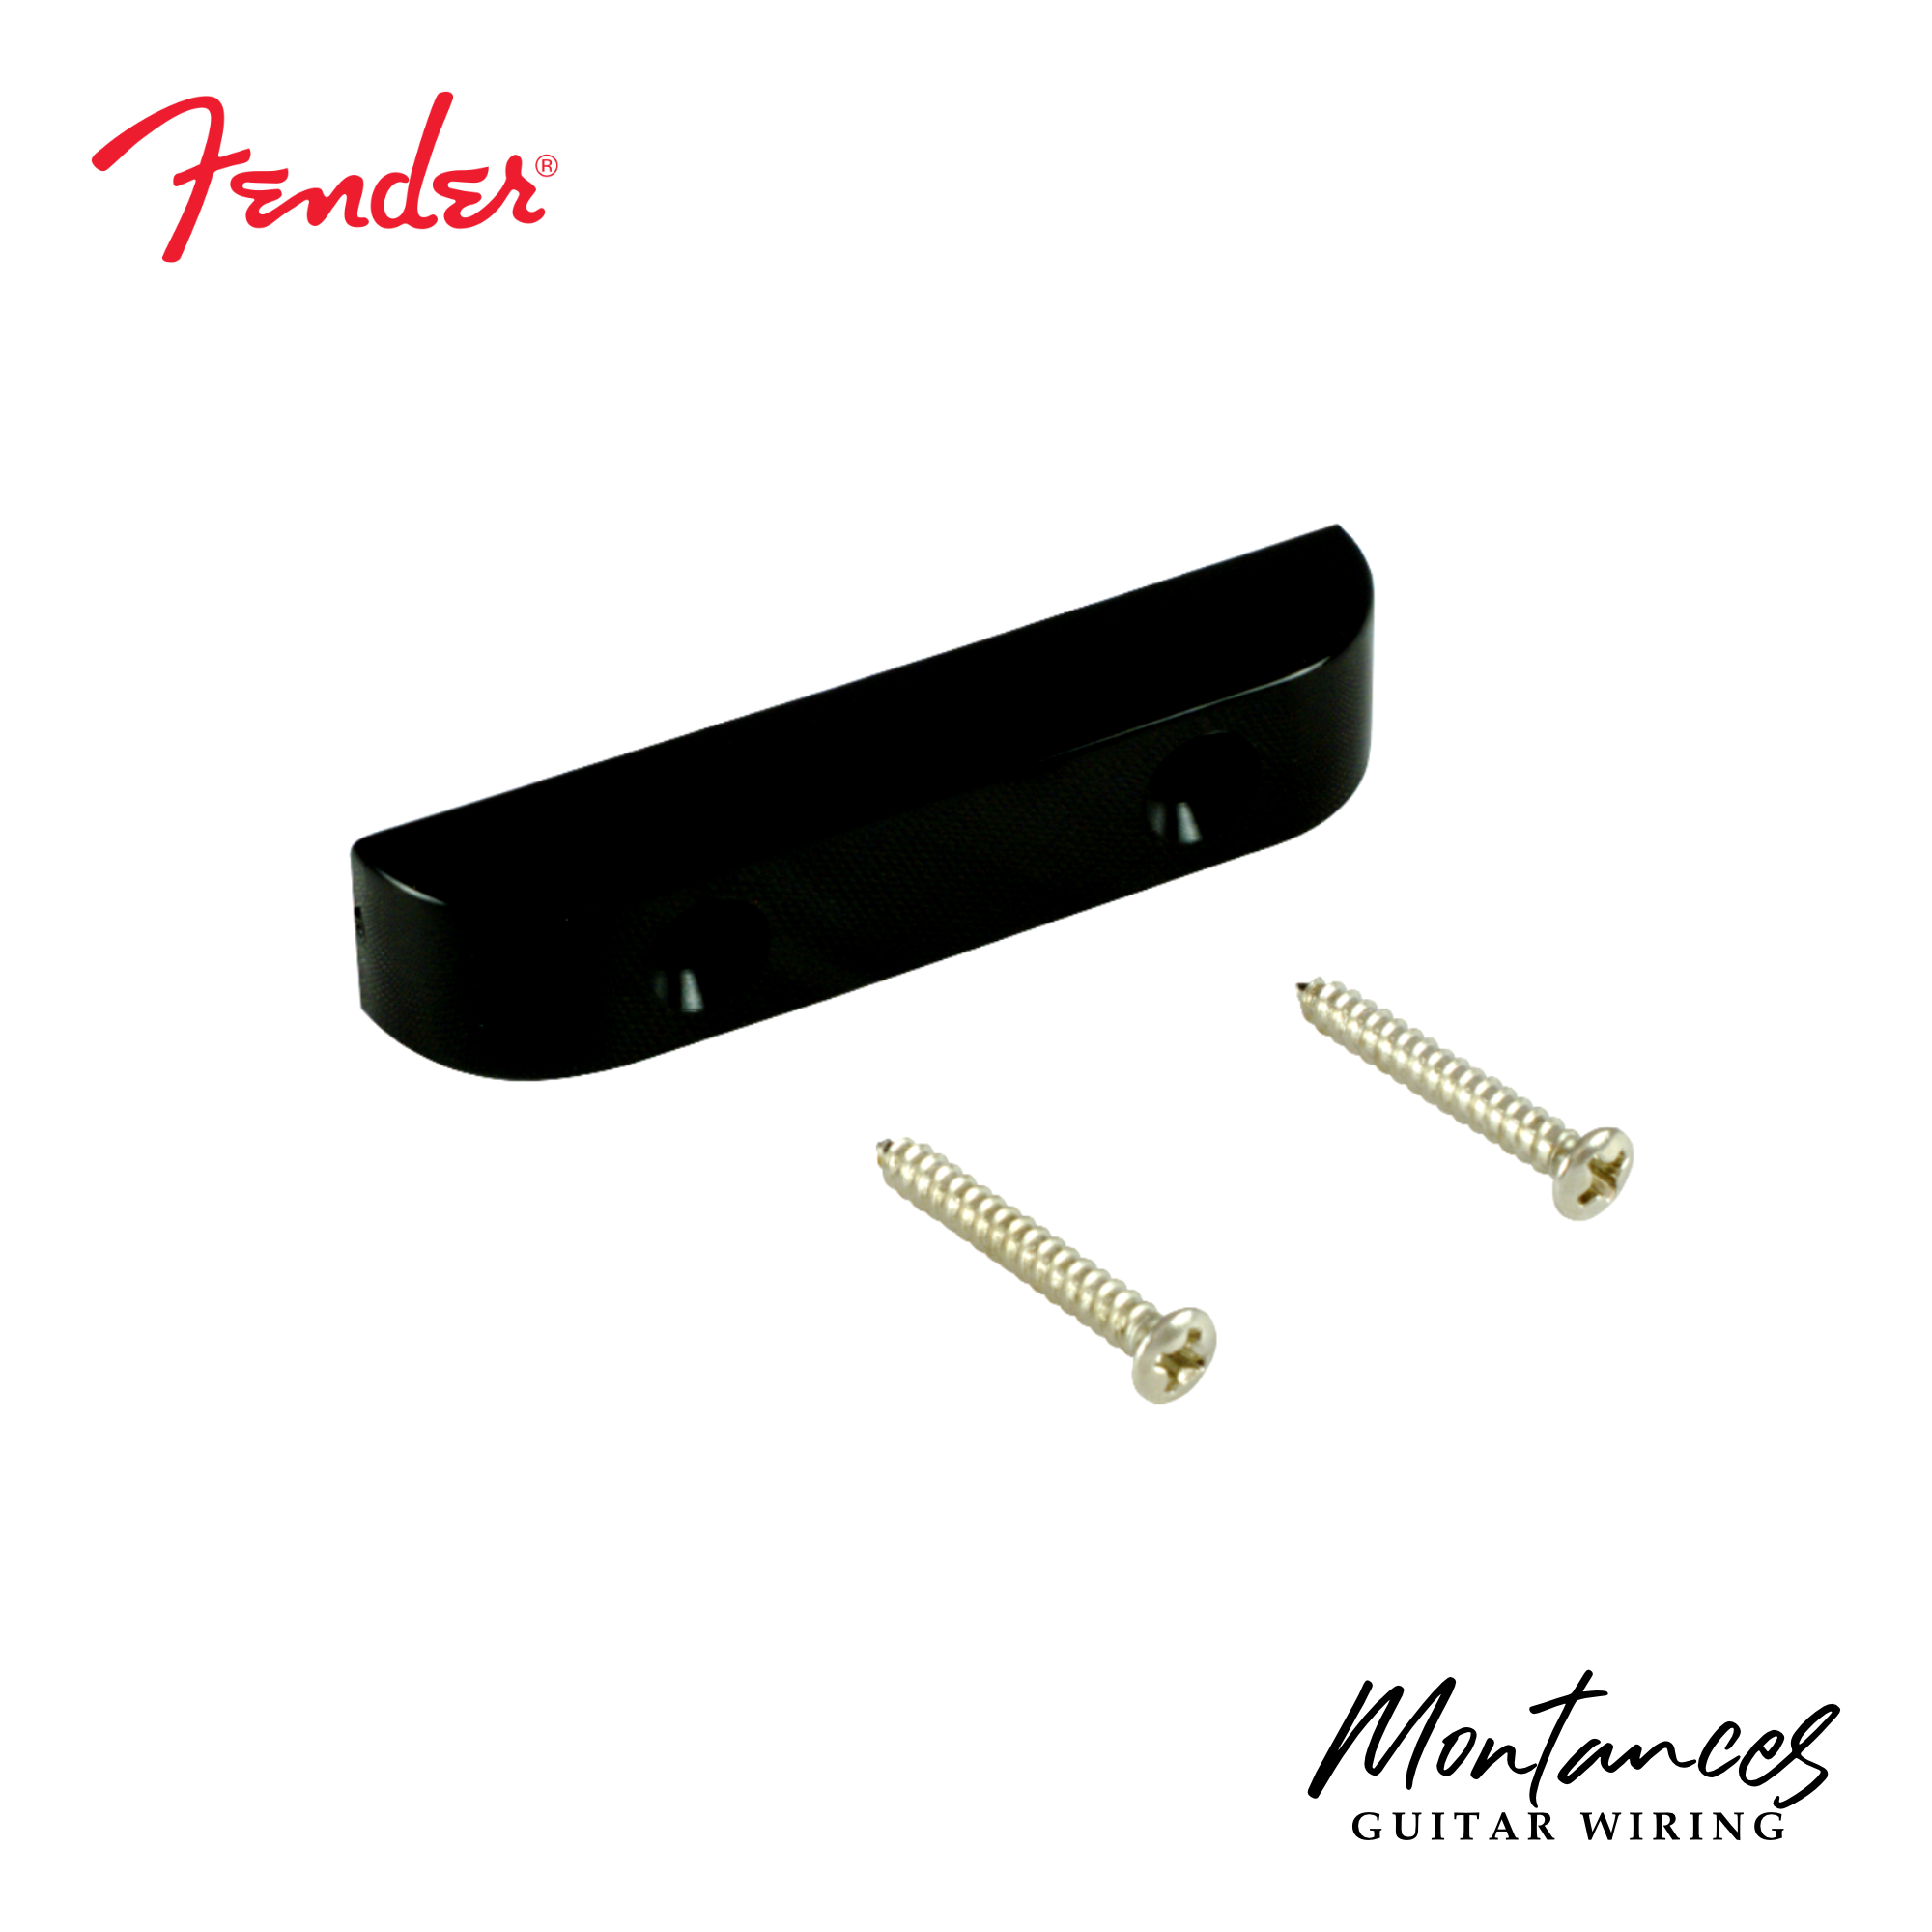 Fender® Thumb rest for J-Bass and P-Bass, black color